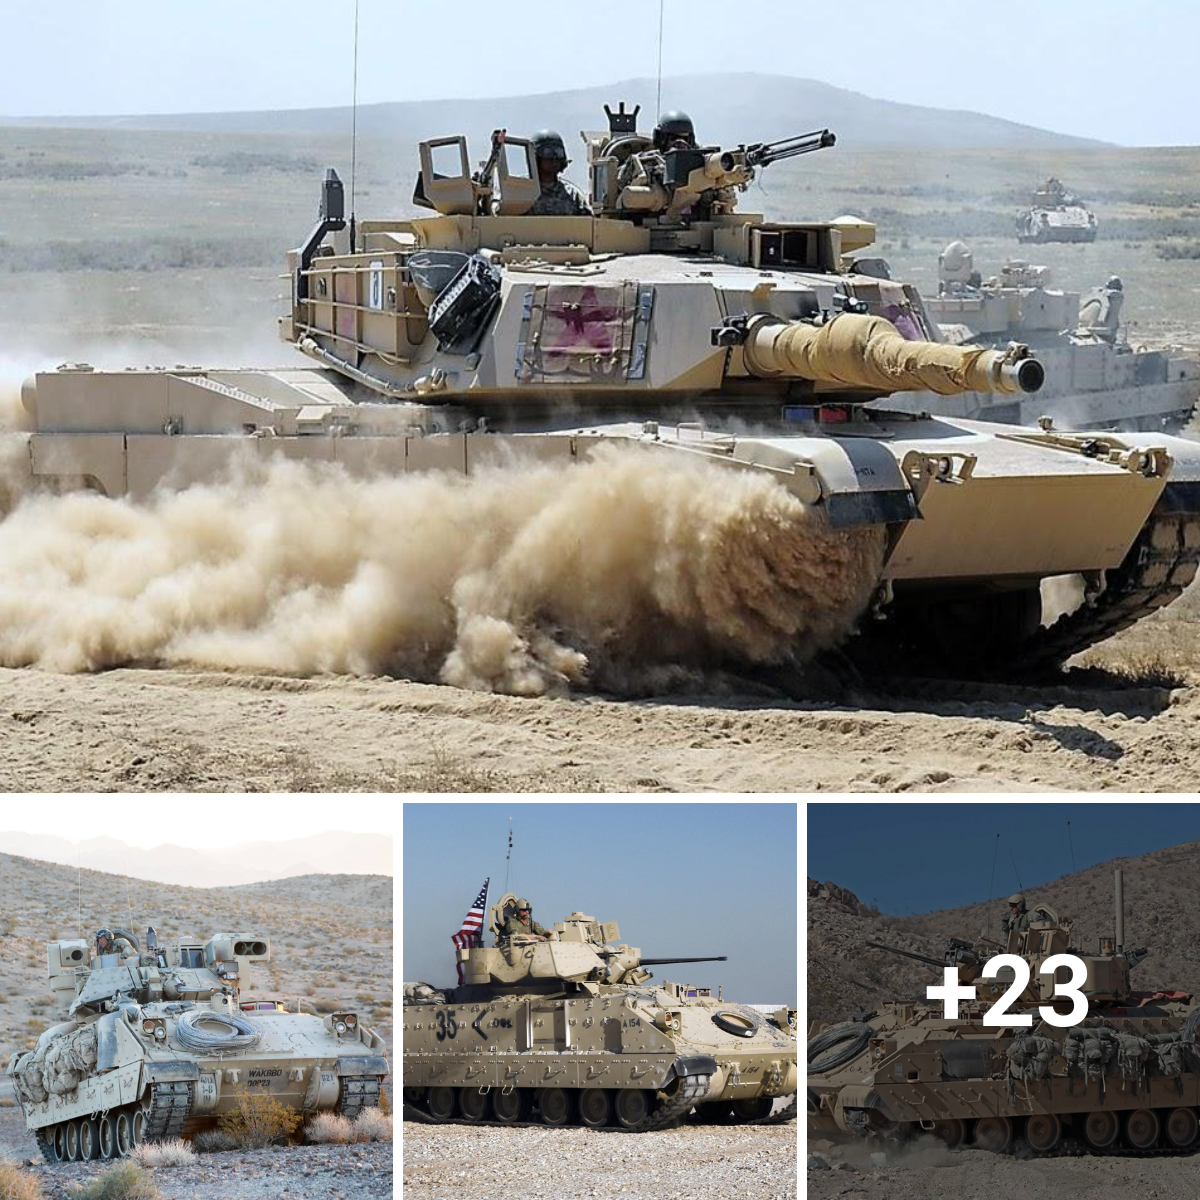 For the US Army, the M1 Abrams has been a vital component of power and defense.